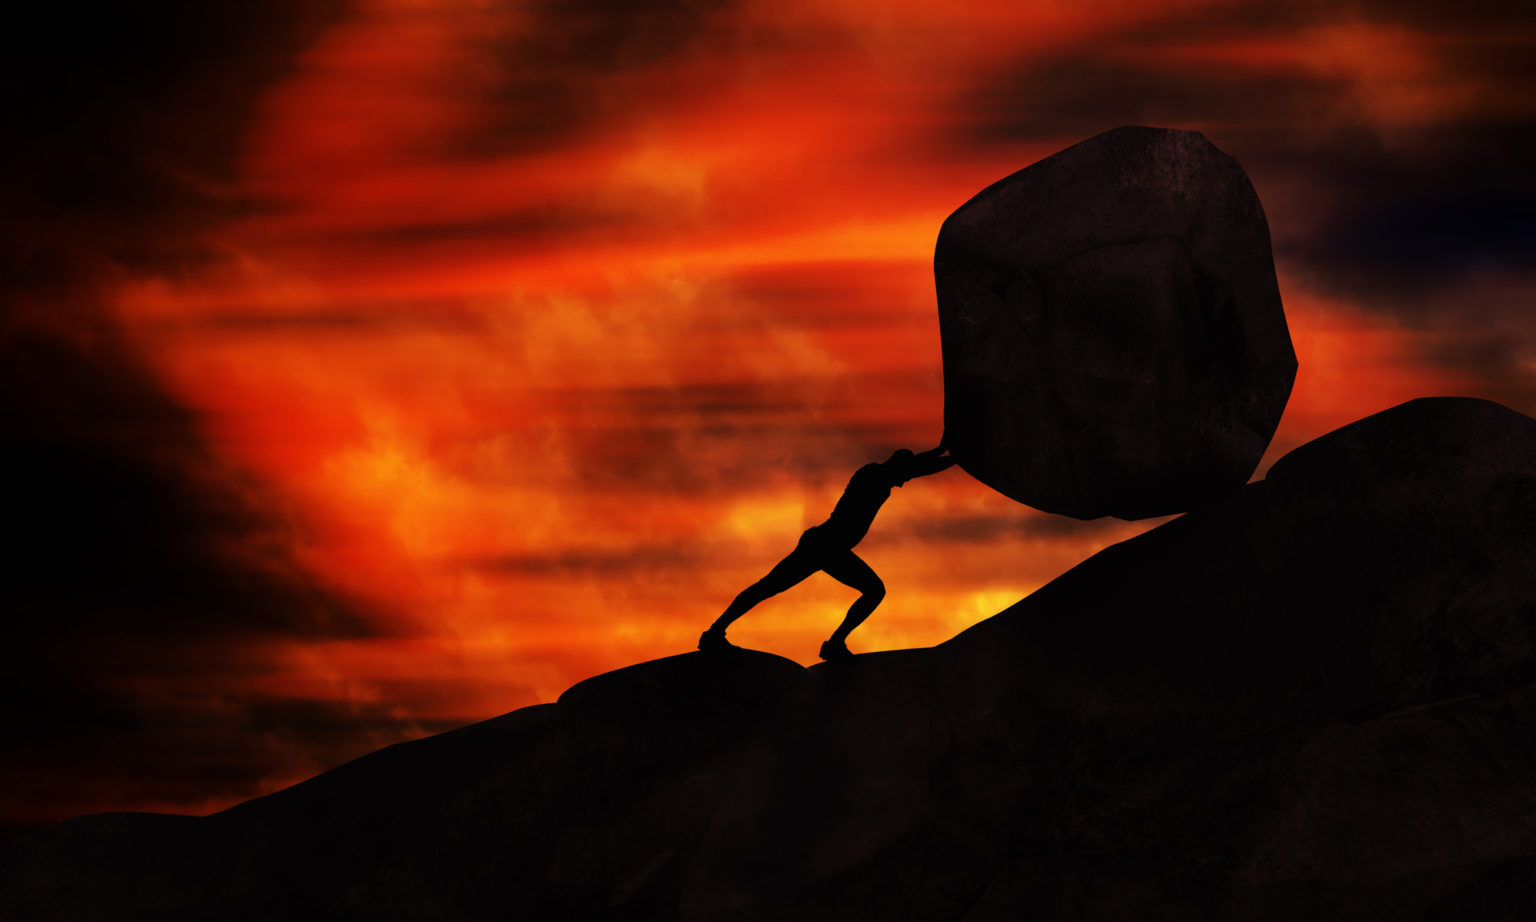 Image of a person pushing a large boulder uphill